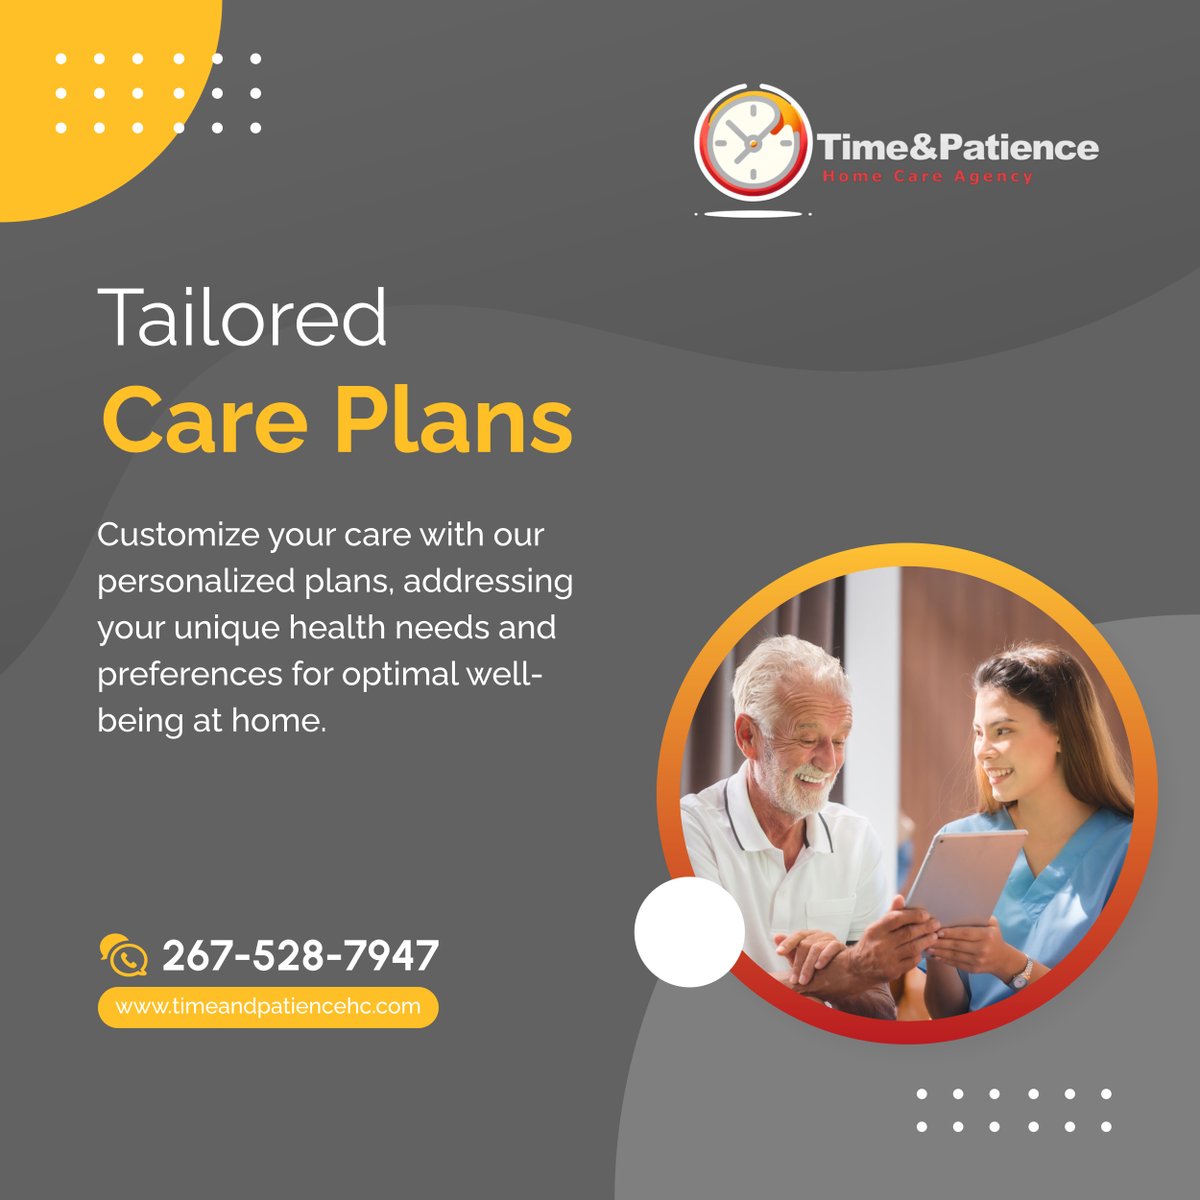 Discover how our tailored care plans can enhance your well-being. Contact us today for a consultation! 

#PhiladelphiaPA #HomeCare #PersonalizedCare